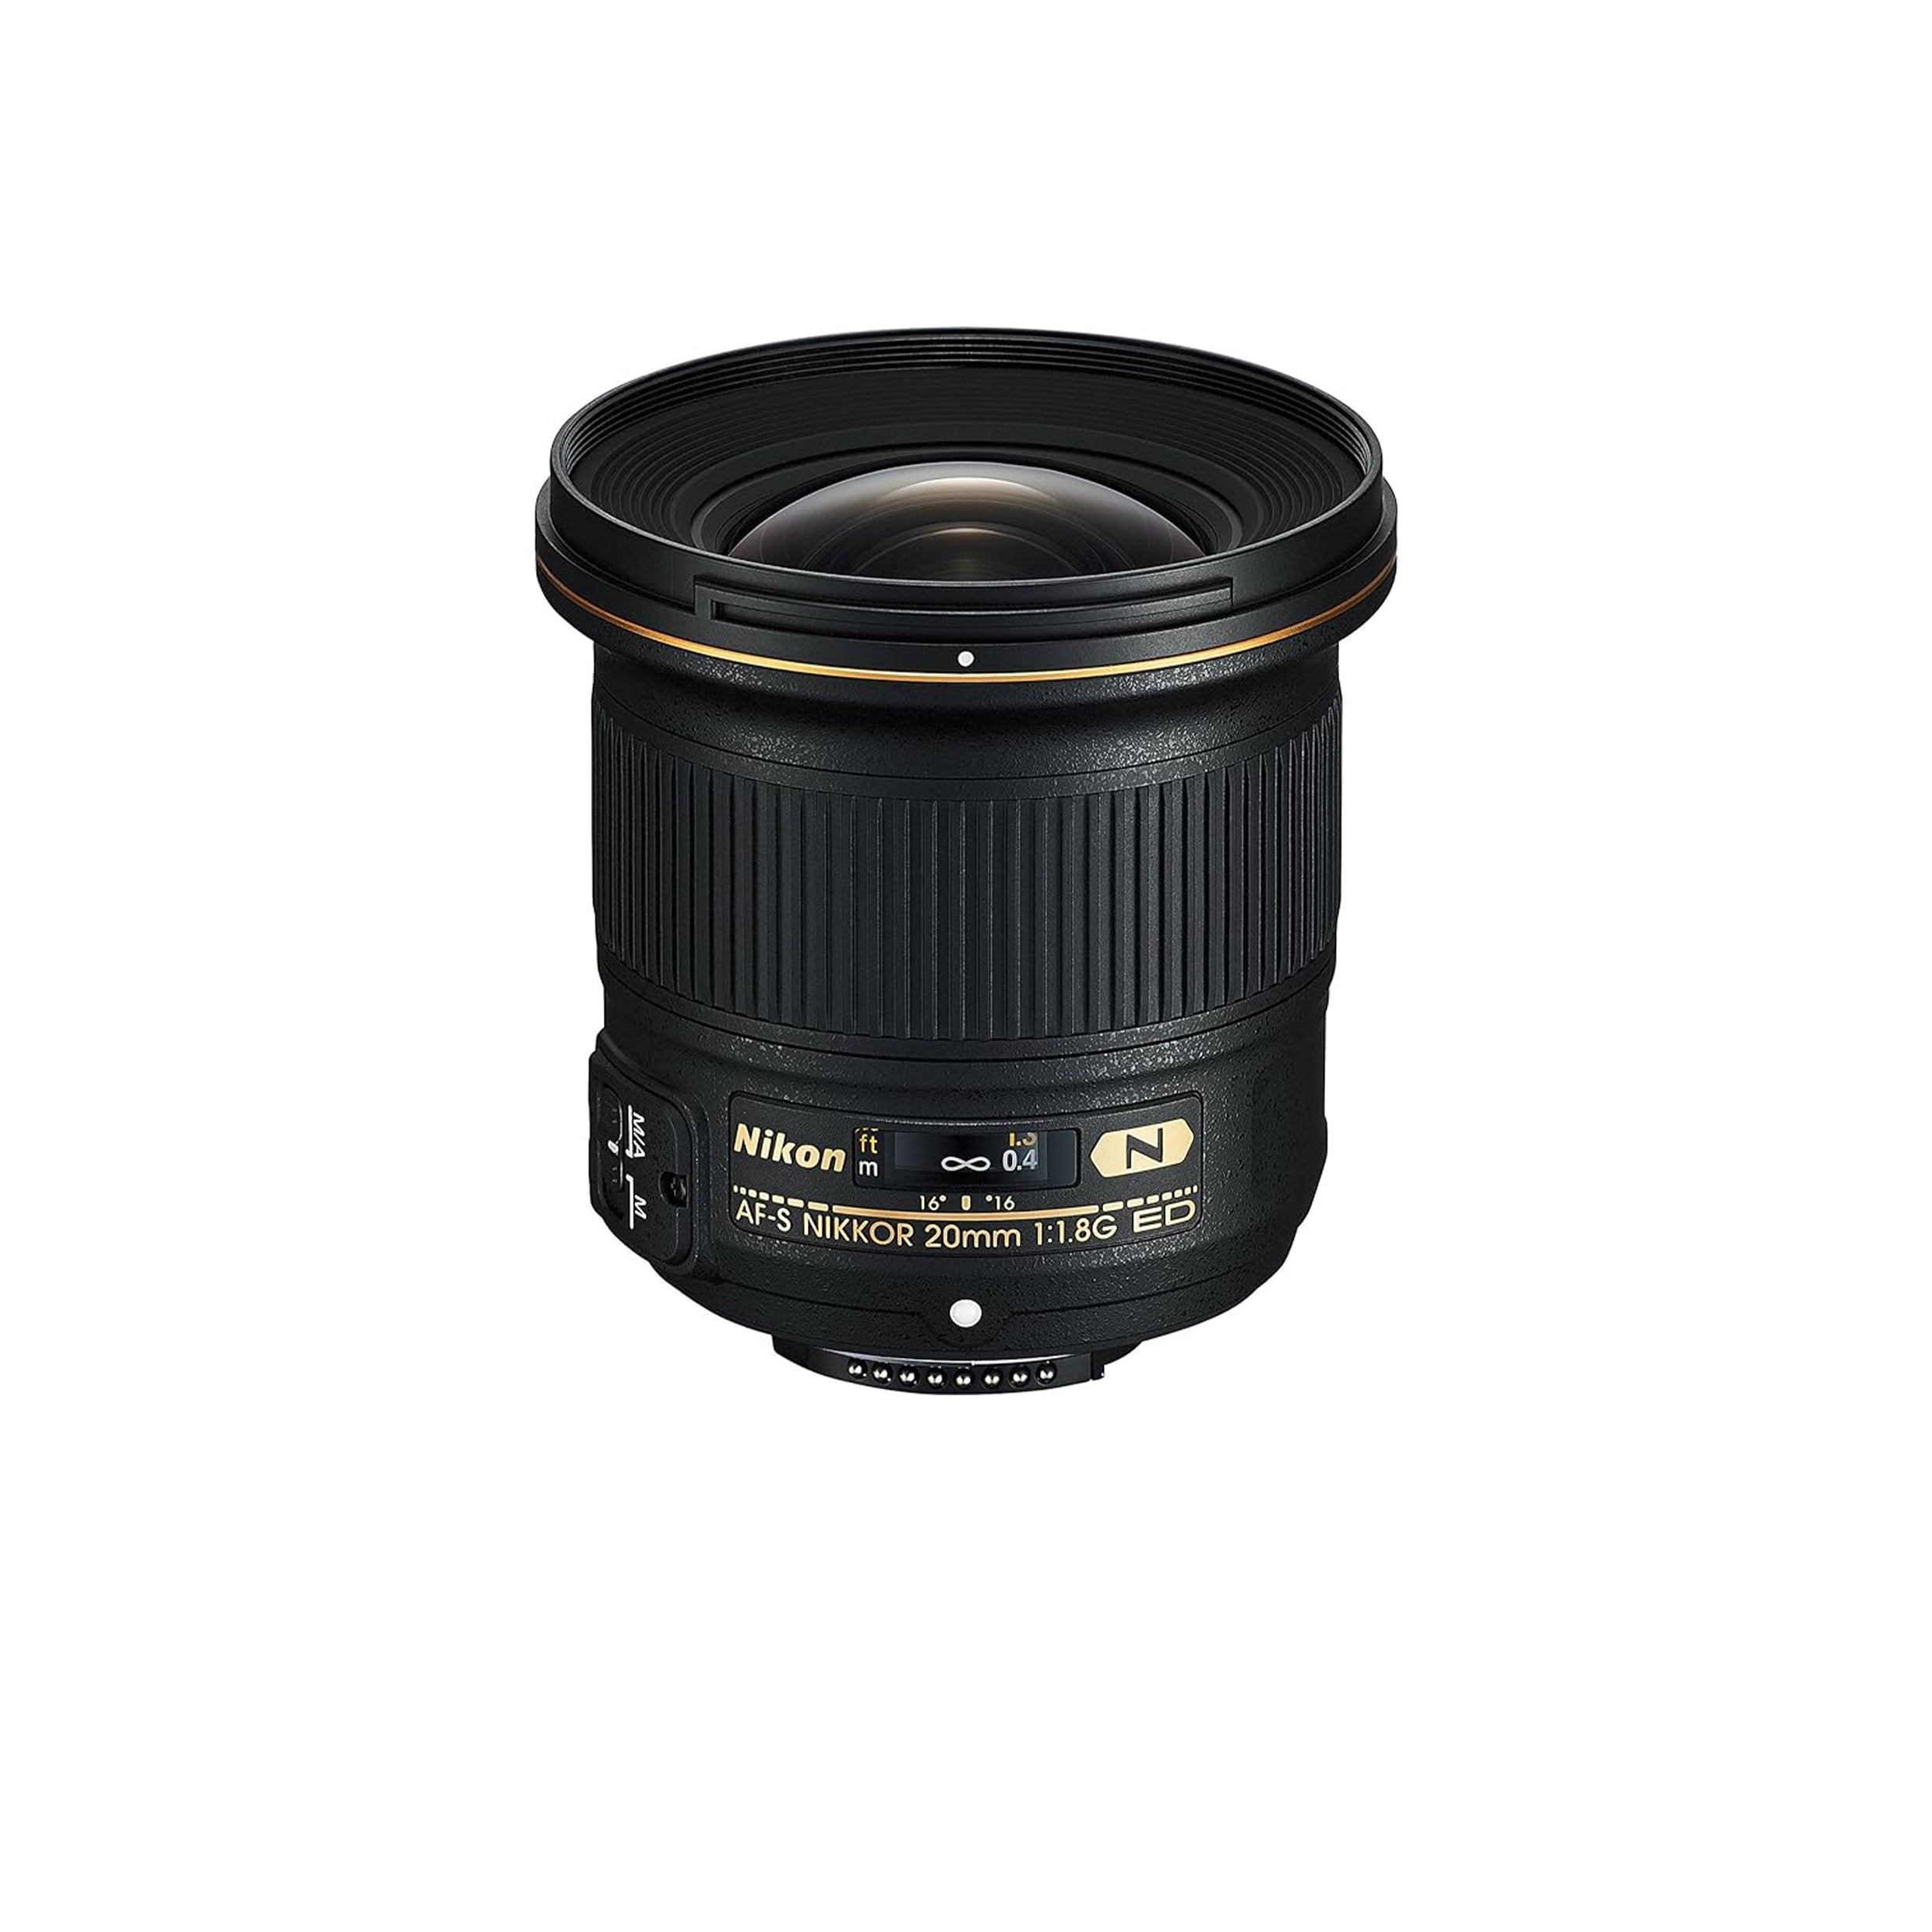 Nikon AF-S FX NIKKOR 20mm f/1.8G ED Fixed Lens with Auto Focus for Nik–  TRUST ELECTRONICS